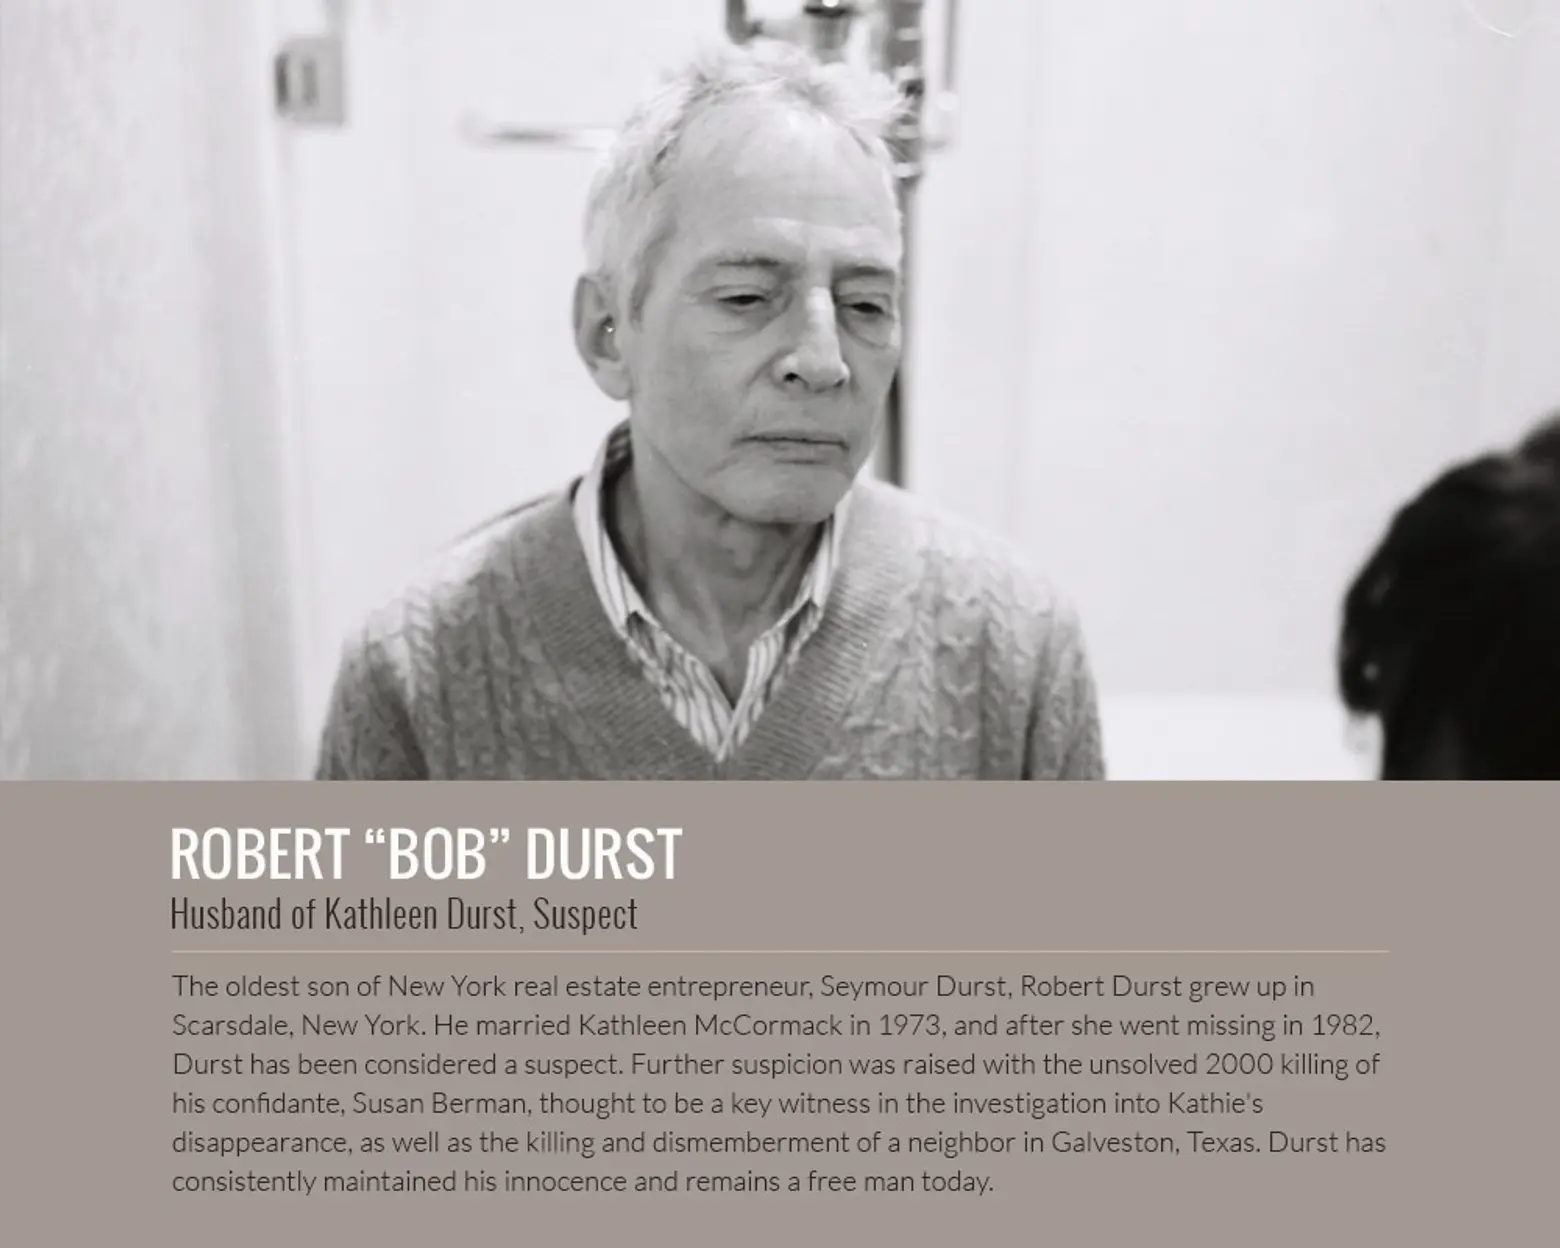 HBO’s Robert Durst Crime Documentary Series Premieres, Is Creepy but Fascinating